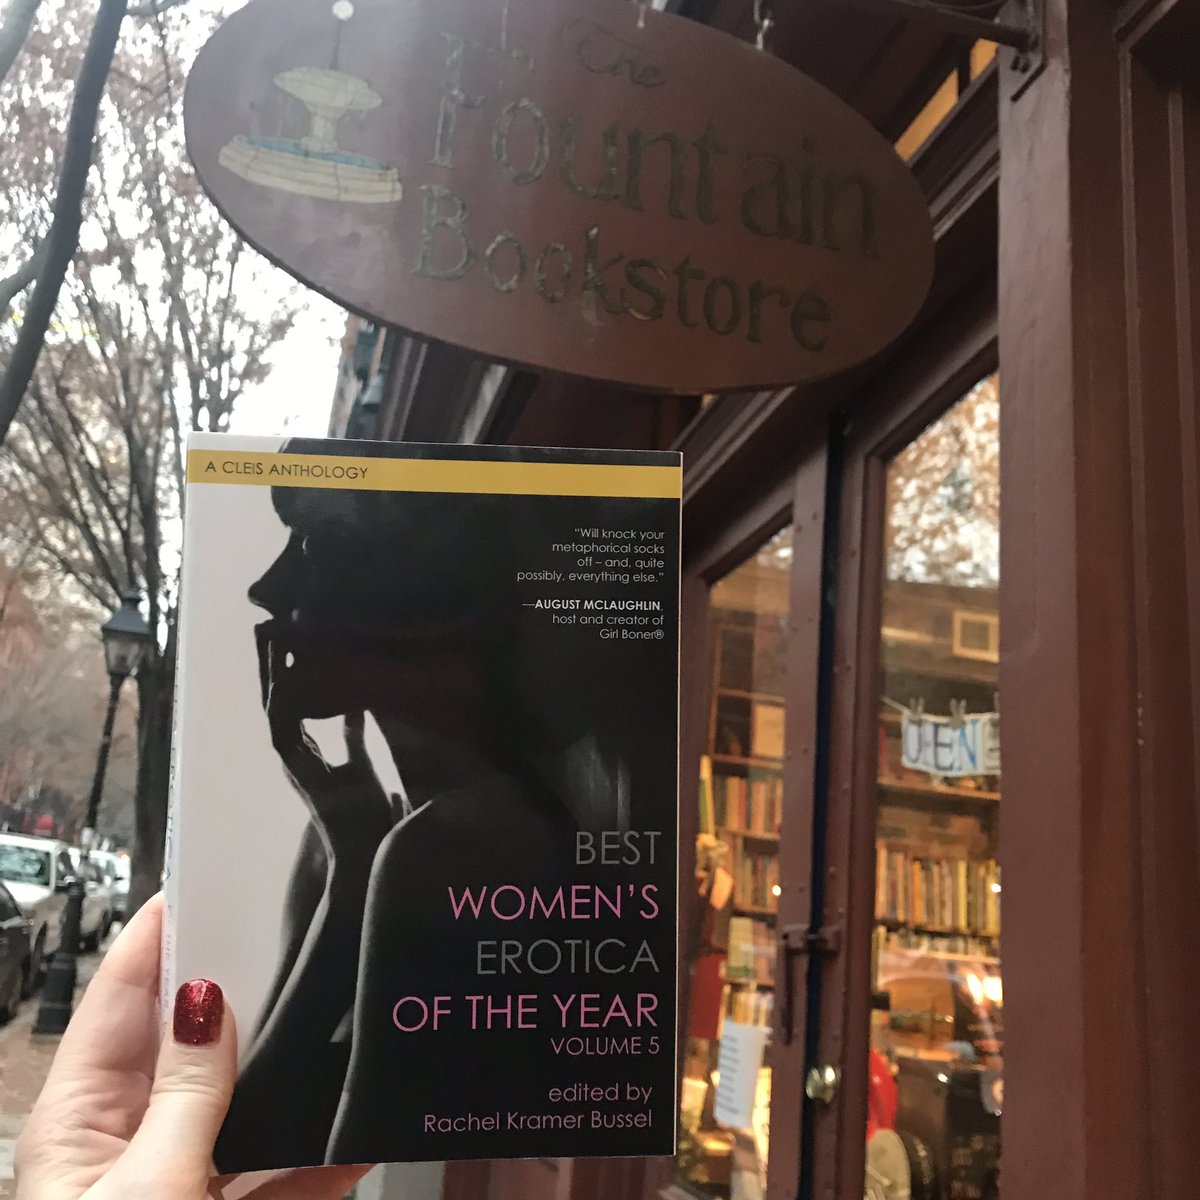 Fun fact: your local bookstore can order your favorite books, including Best Women’s Erotica of the Year, Volume 5! Editor @raquelita just picked up a copy at the wonderful @fountainbookstore in Richmond, Virginia! #shoplocal #indiesfirst #bestwomenserotica @indiebound